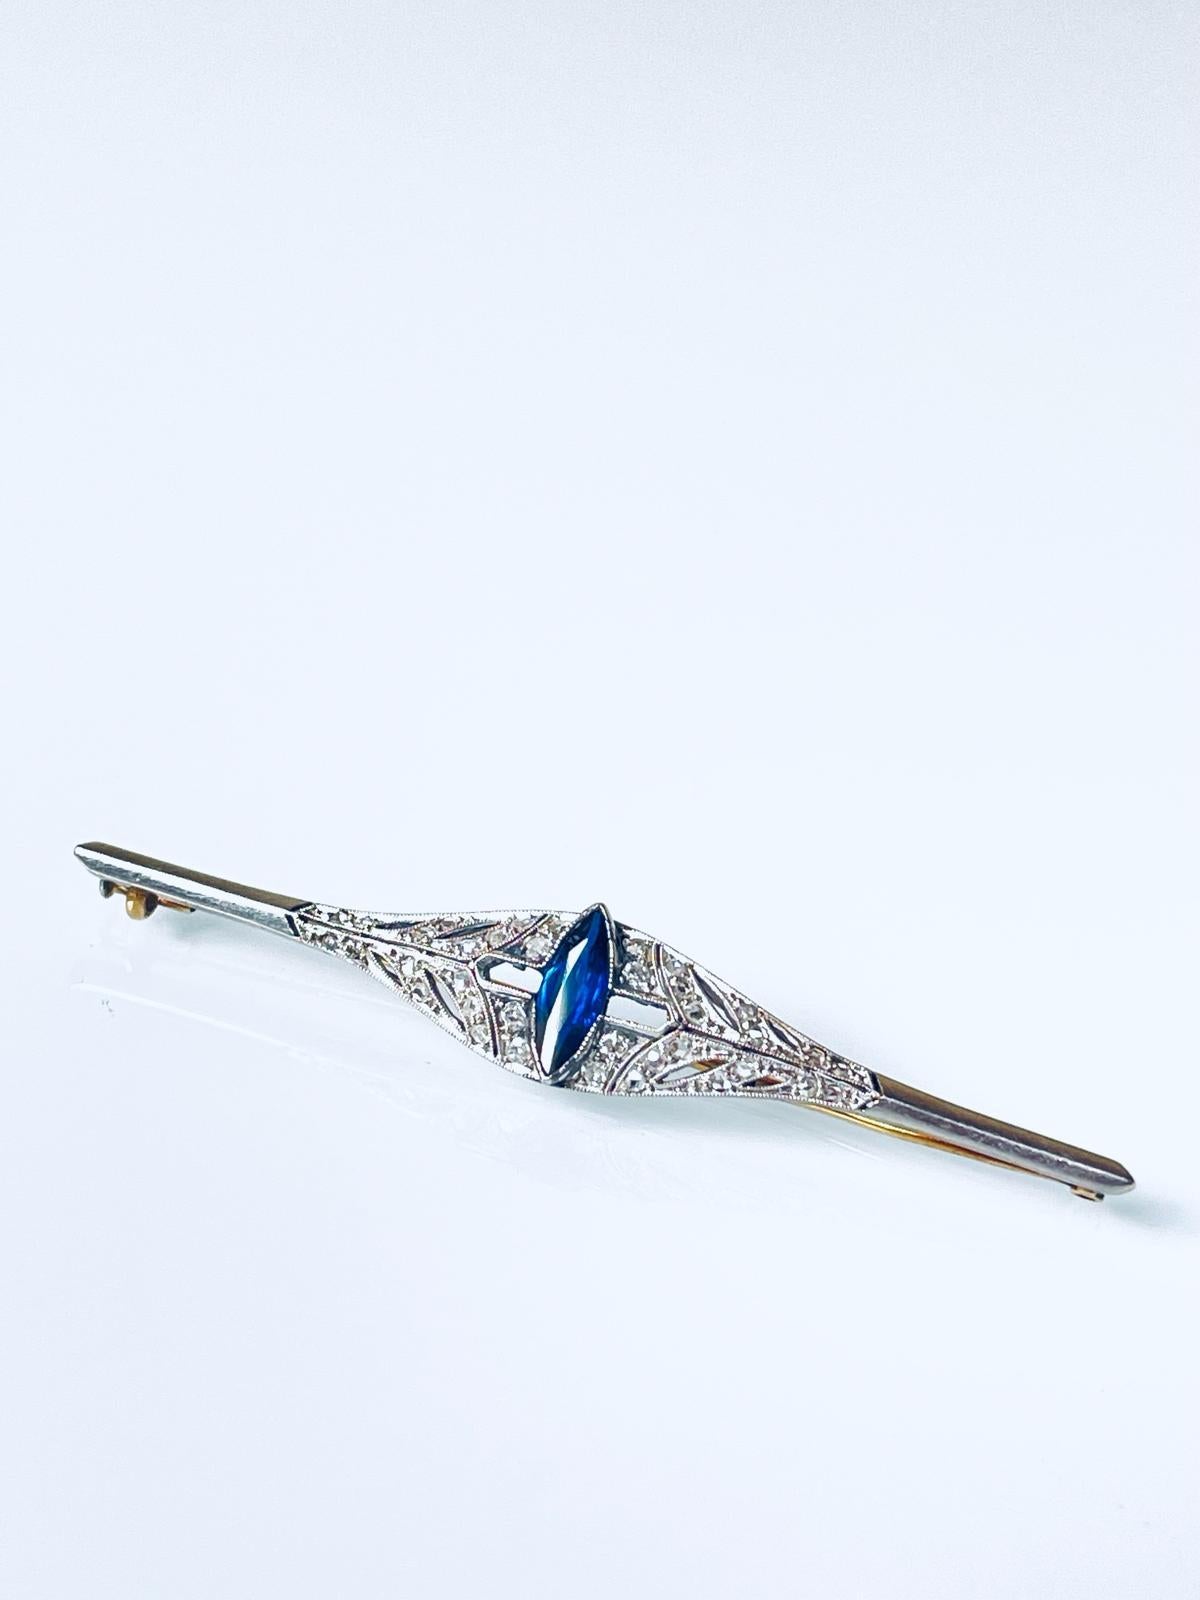 A stylish Art Deco brooch pin in platinum topped 18K yellow gold set with diamonds and marquise cut natural medium blue sapphire. The brooch comes with the box shown in the photo.

Item specifications: platinum-topped 18K yellow gold tested; 28 rose